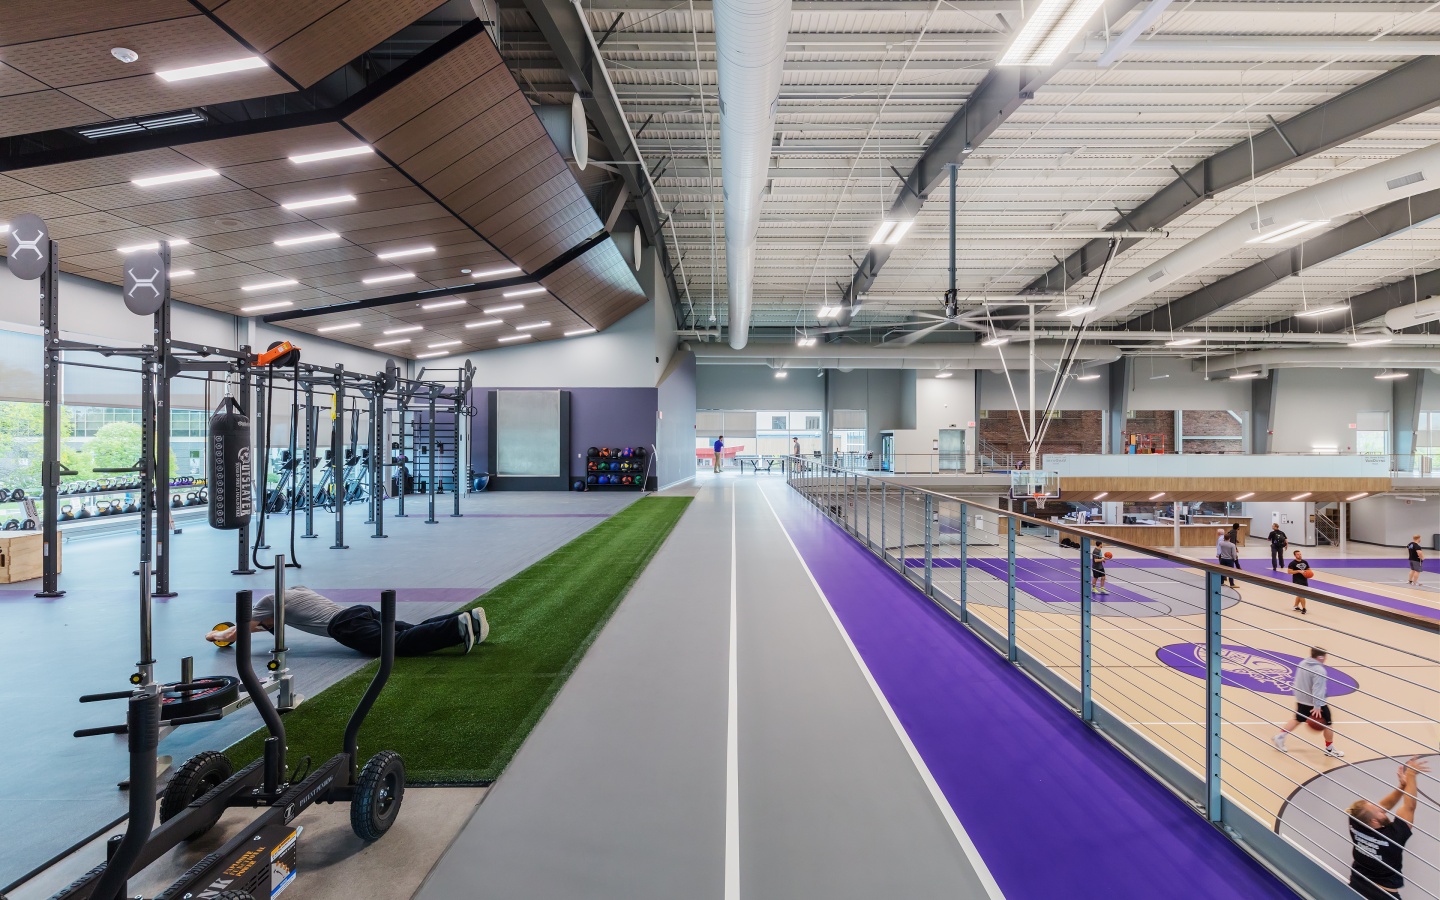 Indoor Recreation Facility With Synthetic Gym Flooring